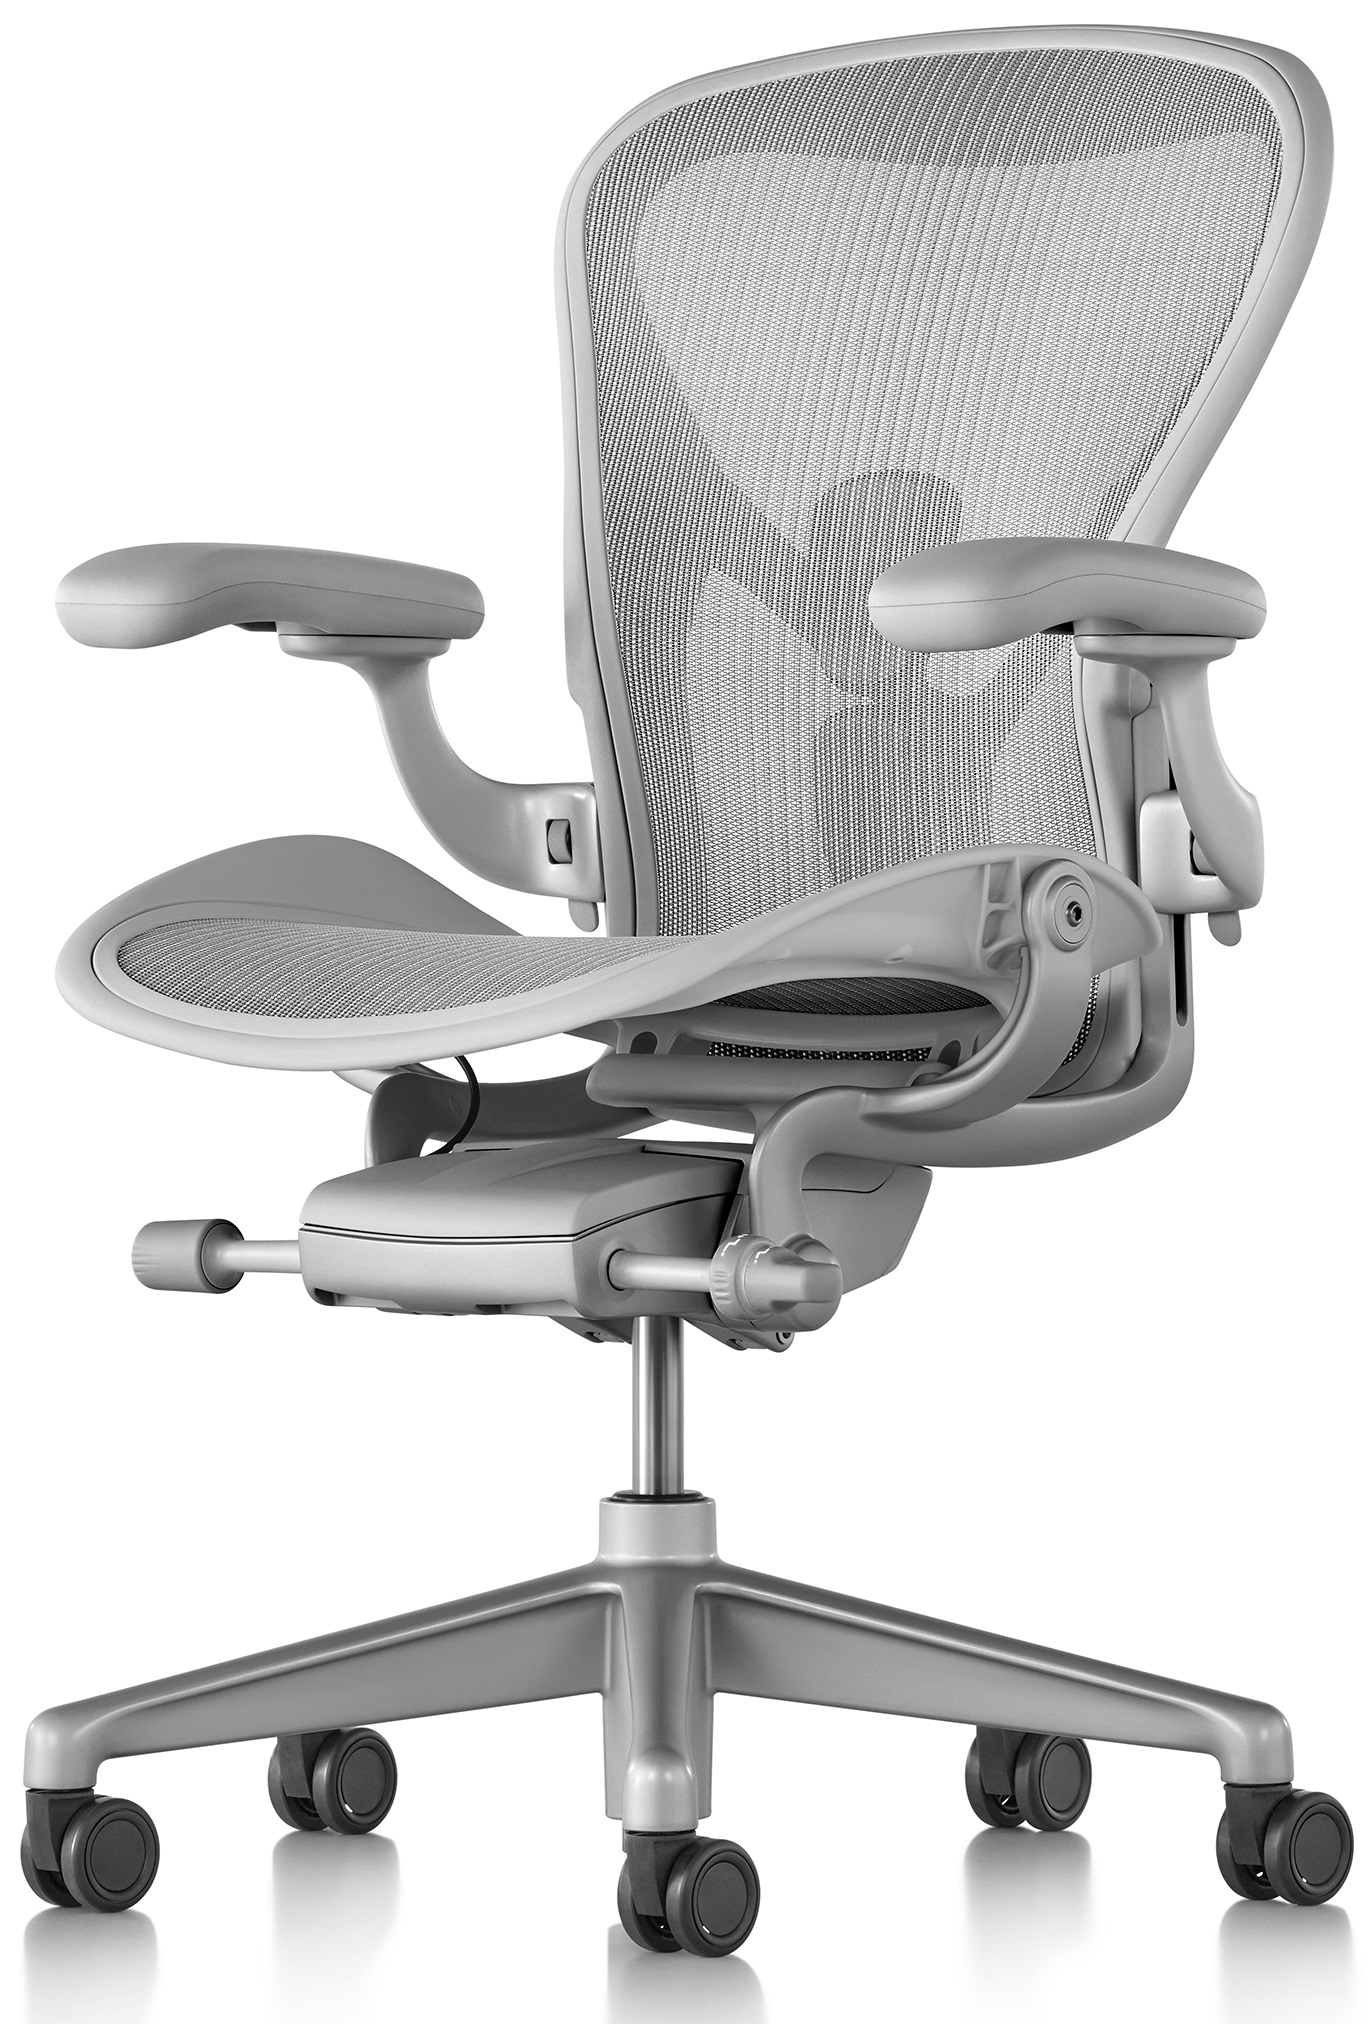 Herman Miller Aeron Review 2020 Is Chair Worth It Or Not